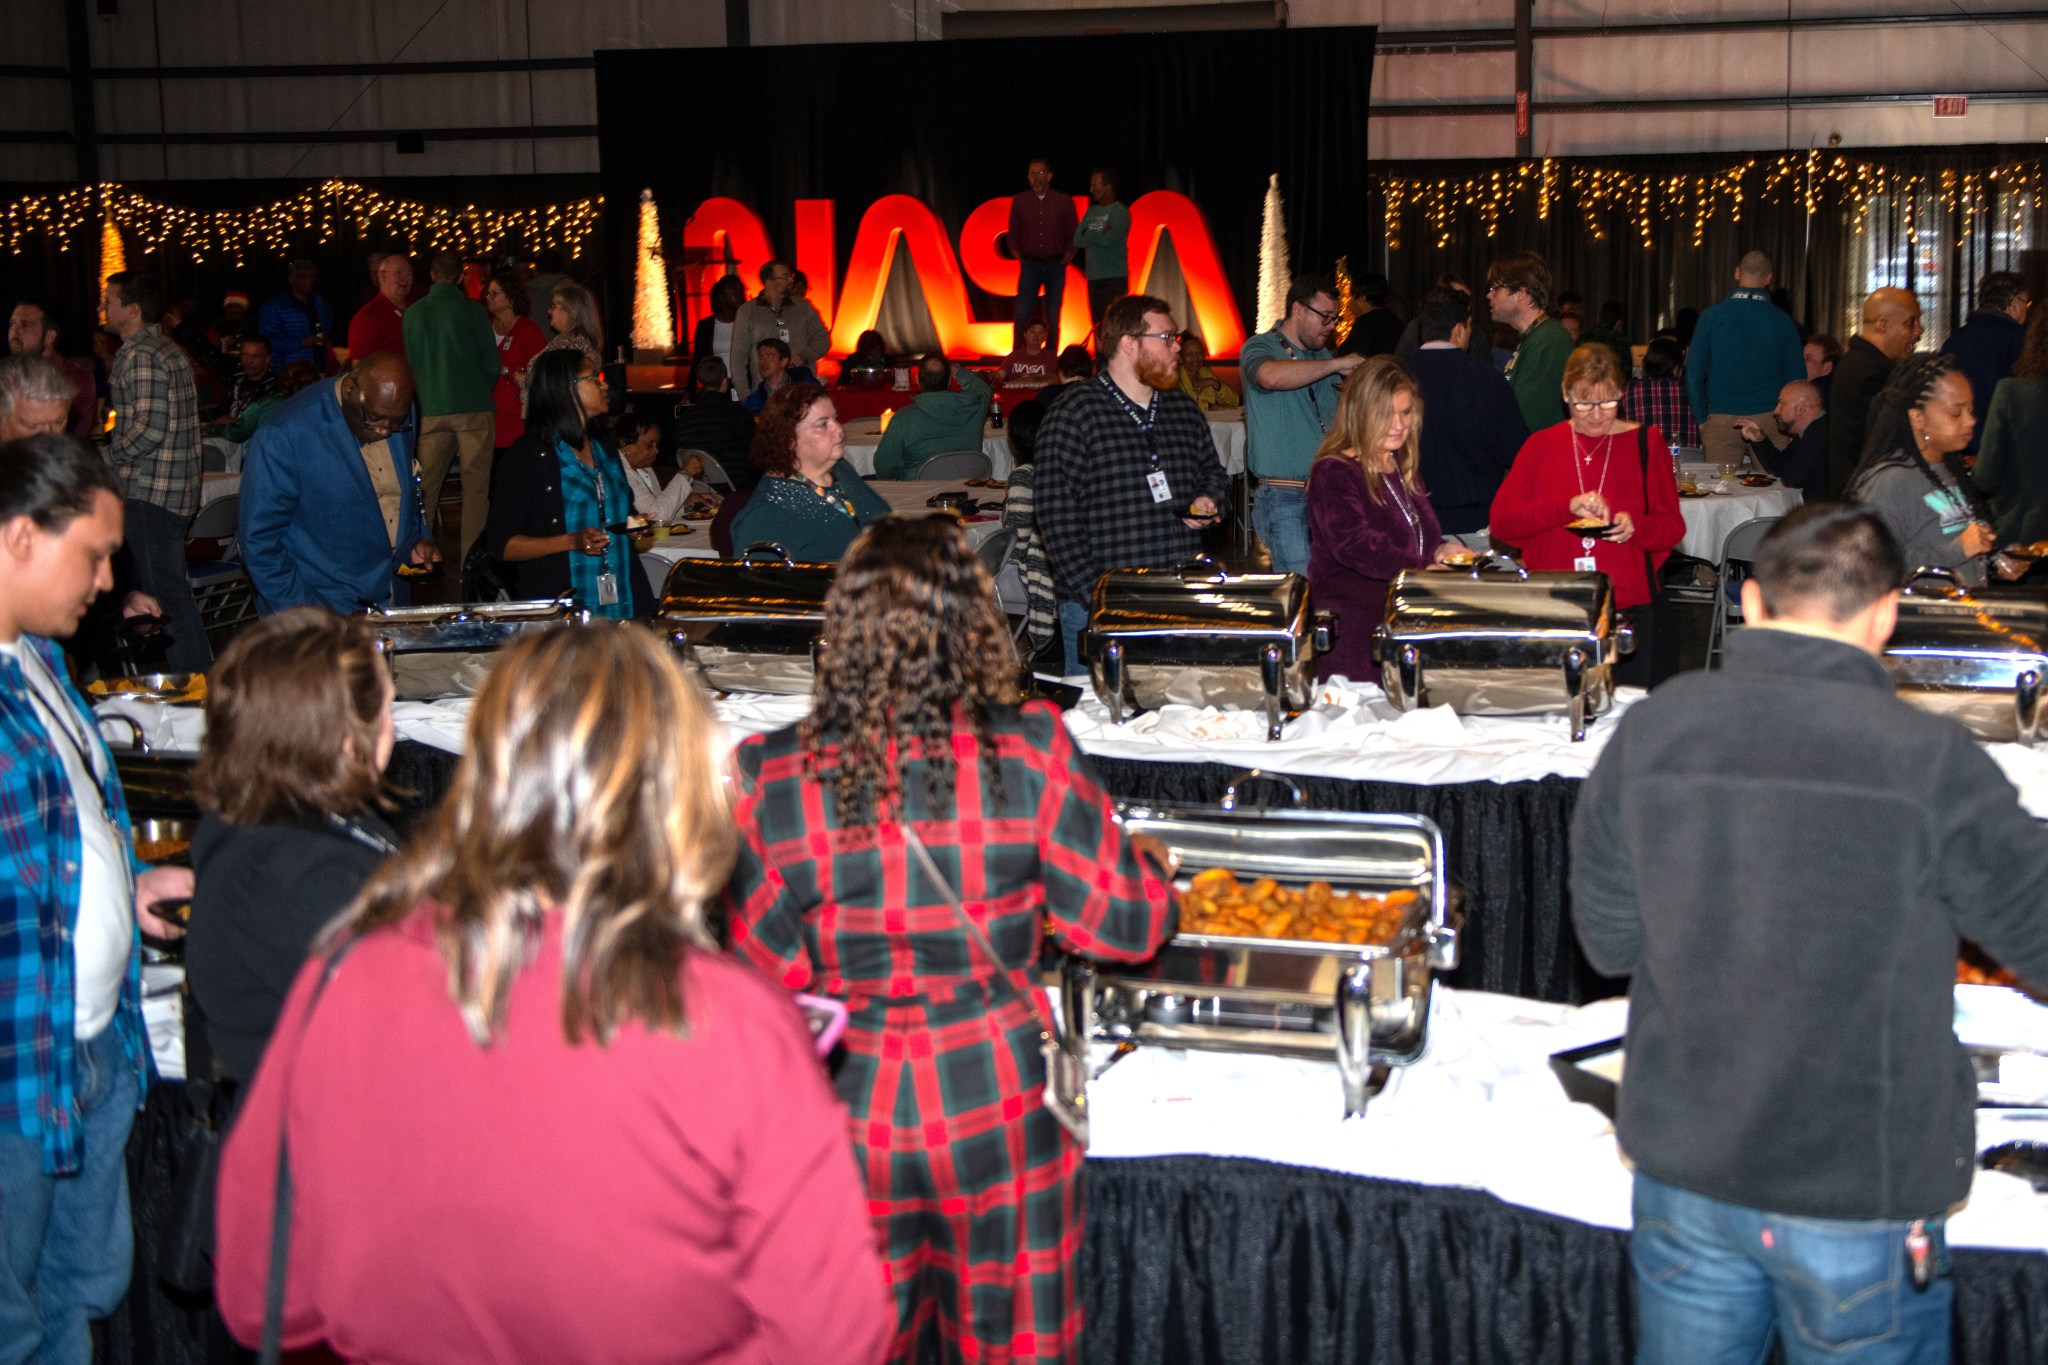 Hundreds of Marshall team members enjoy the buffet-style food offerings at the center’s holiday reception.